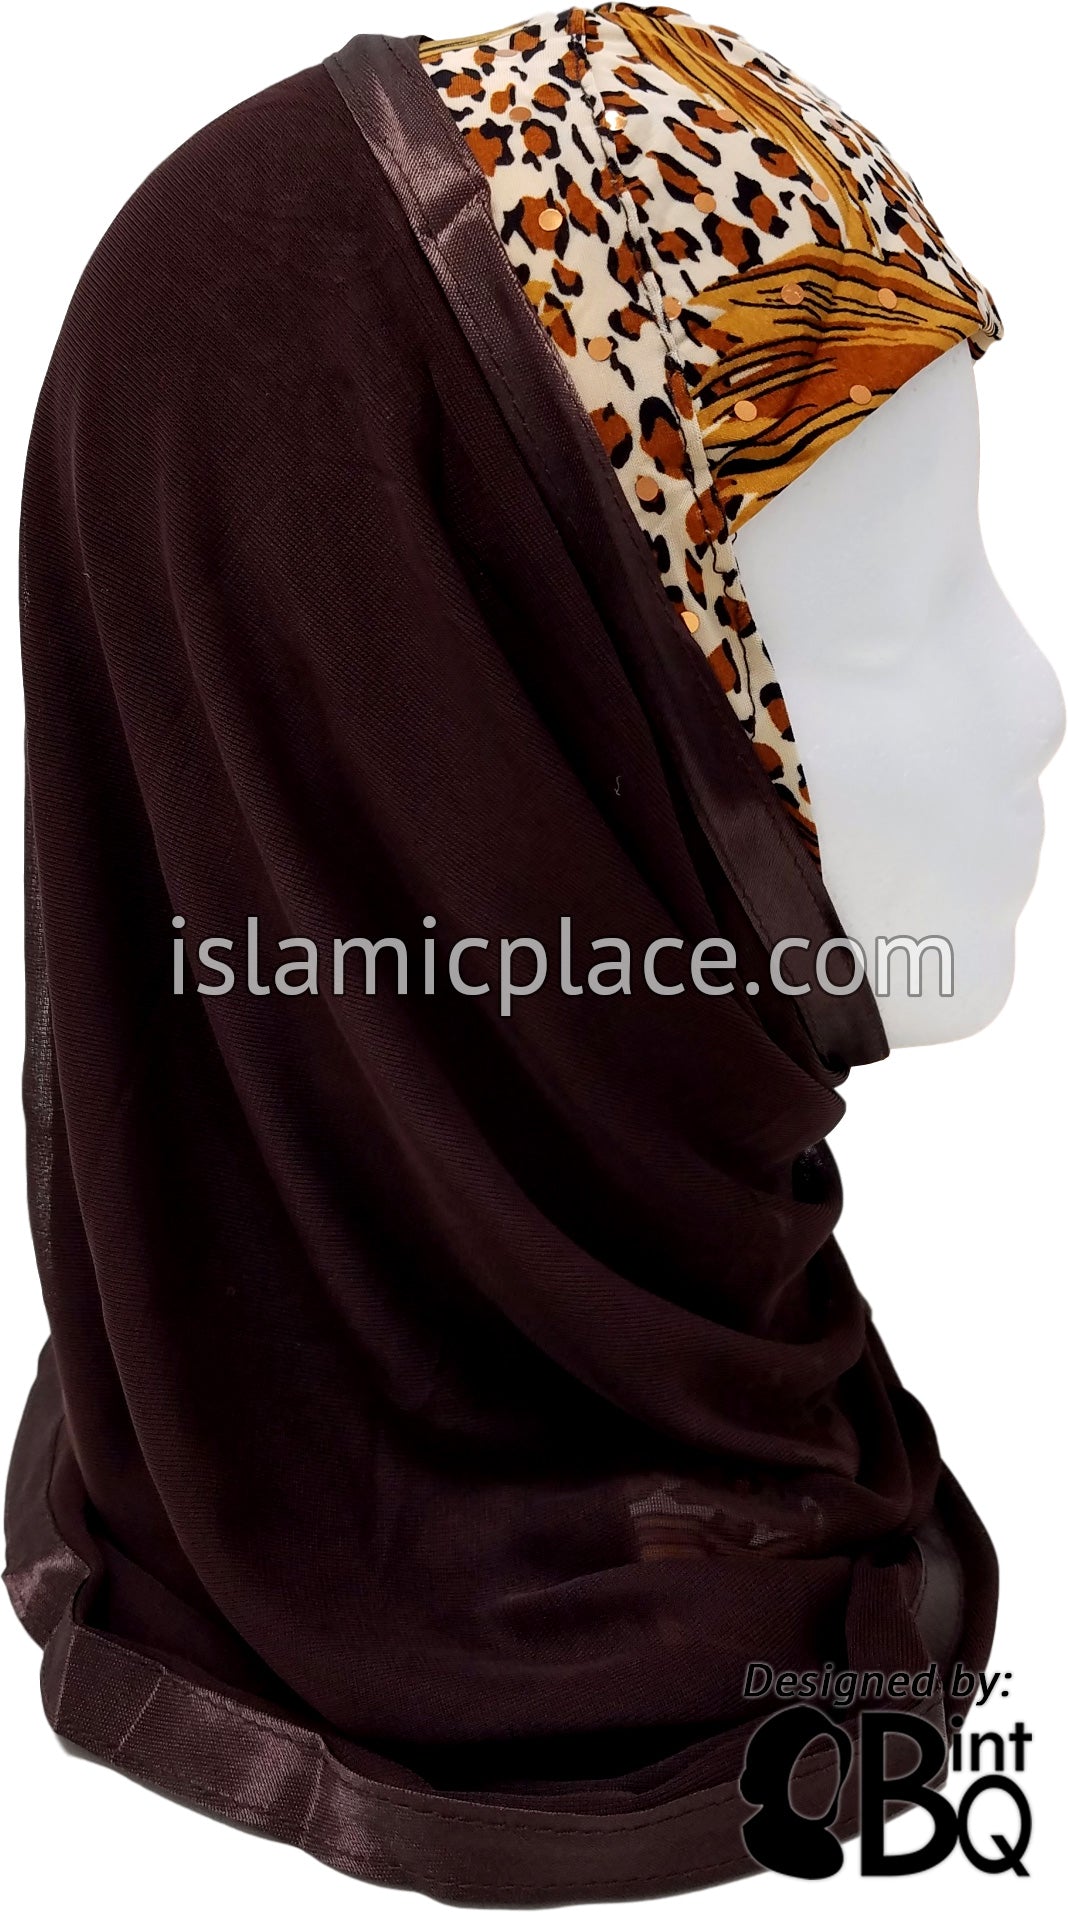 Brown and Black Leopard Print with Brown and Tan Claw Marks with Brown Wrap - Kuwaiti Scarf